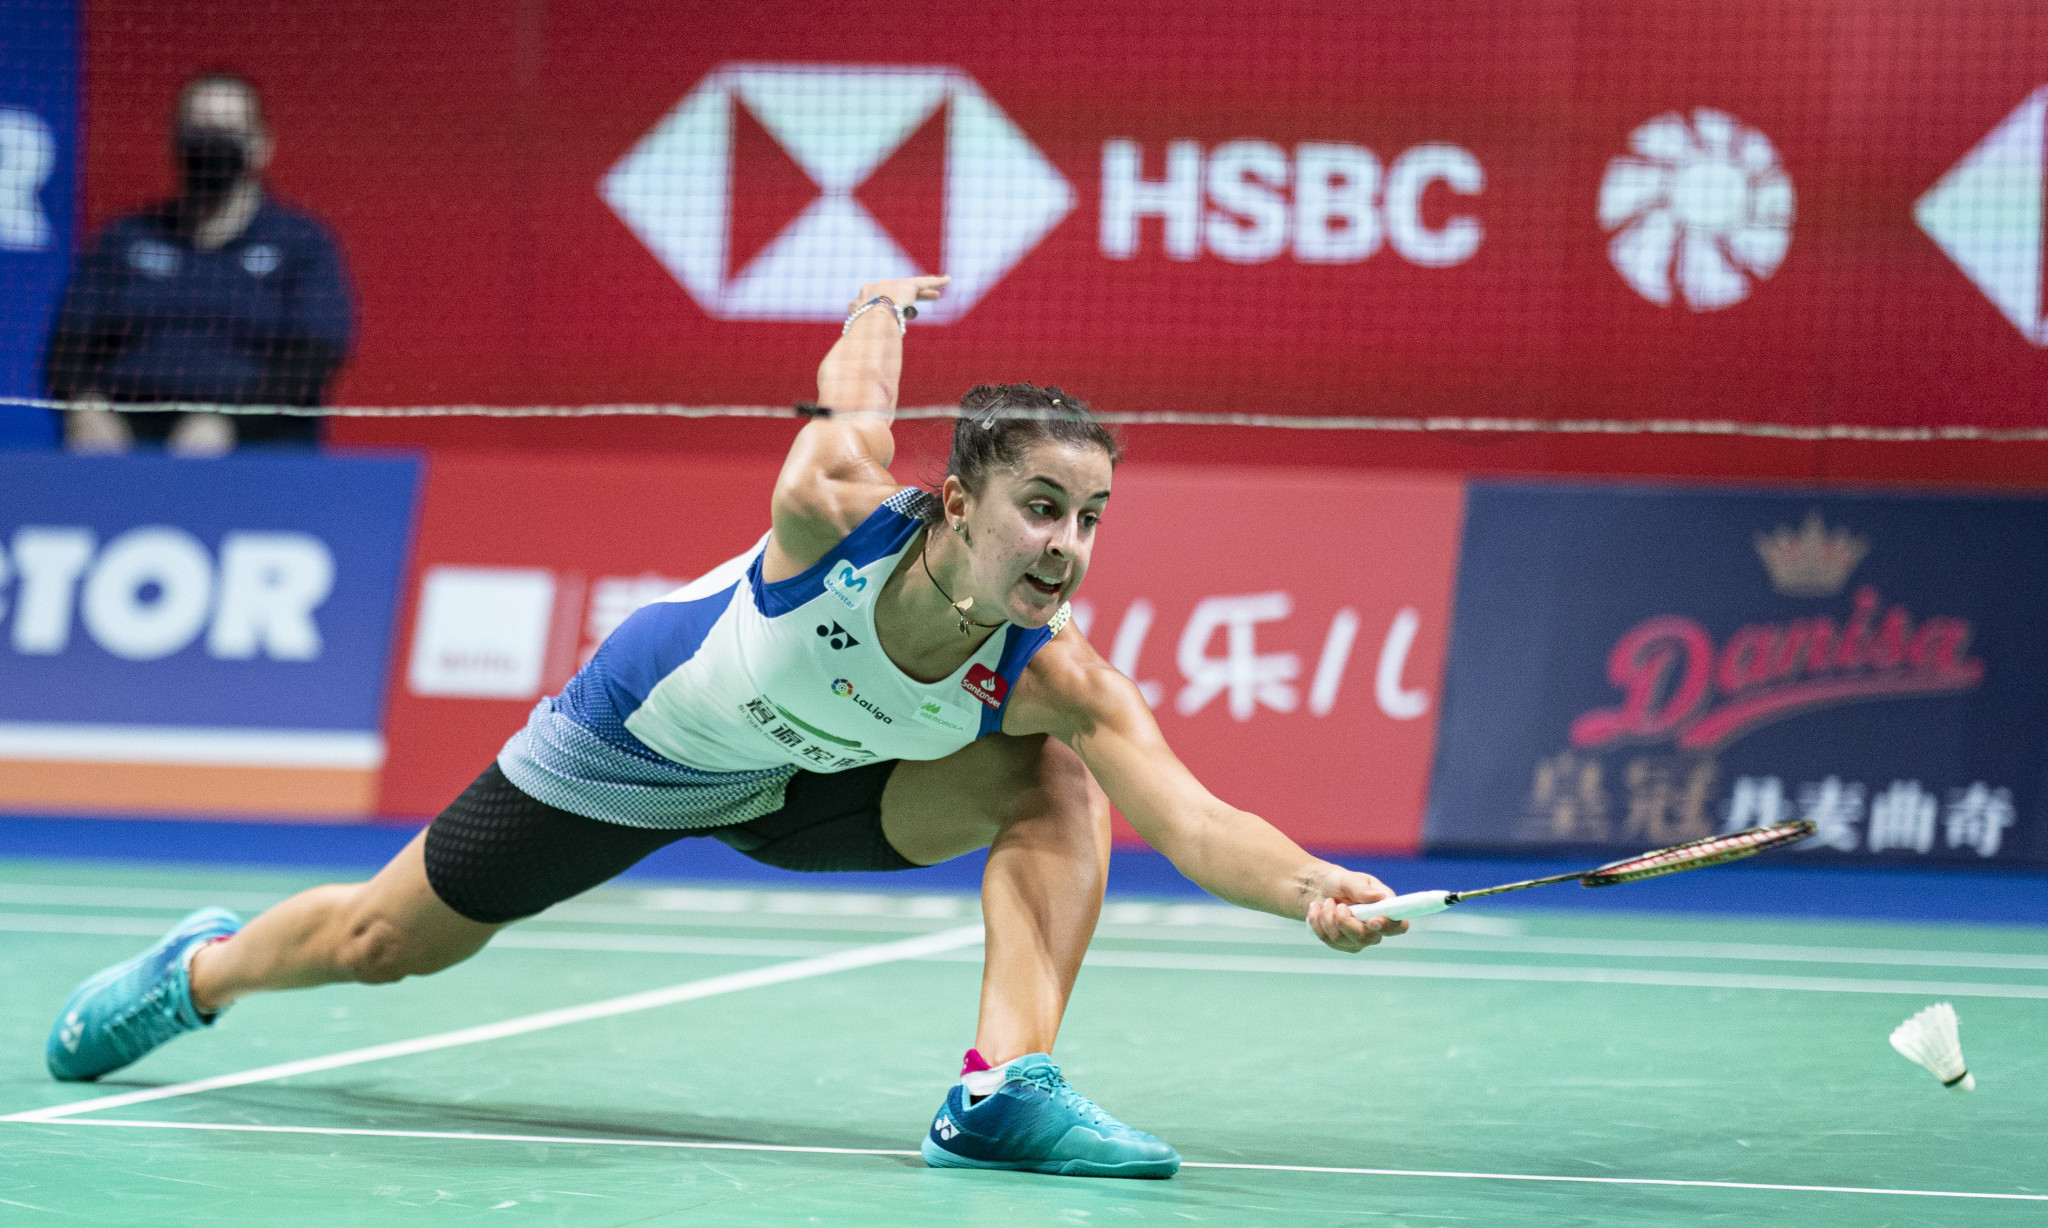 Top seeds Marin and Axelsen advance at European Badminton Championships